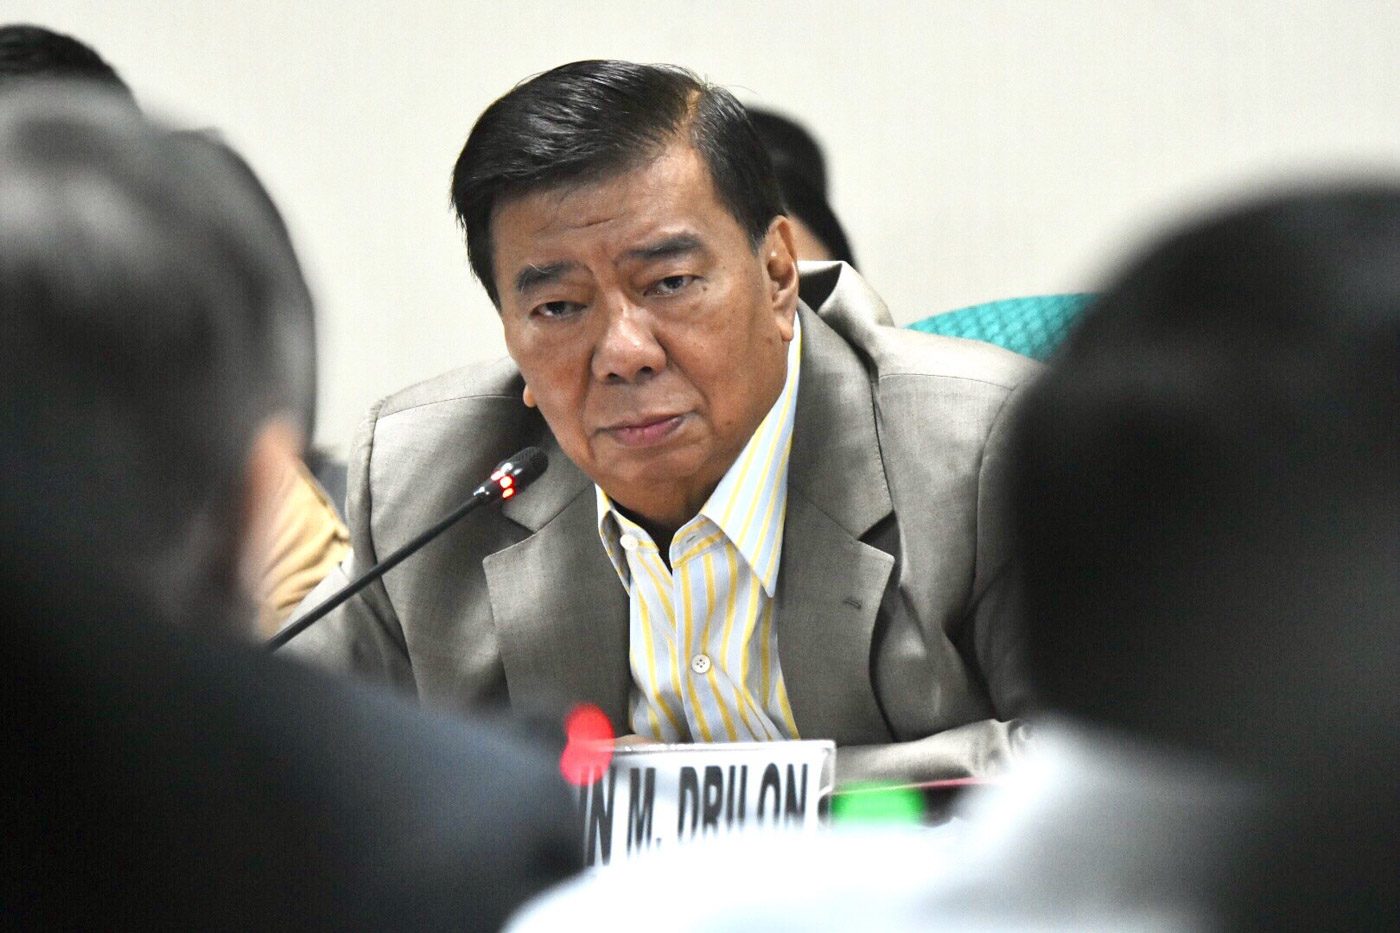 Drilon urges Duterte to review ‘appeasement policy’ towards China